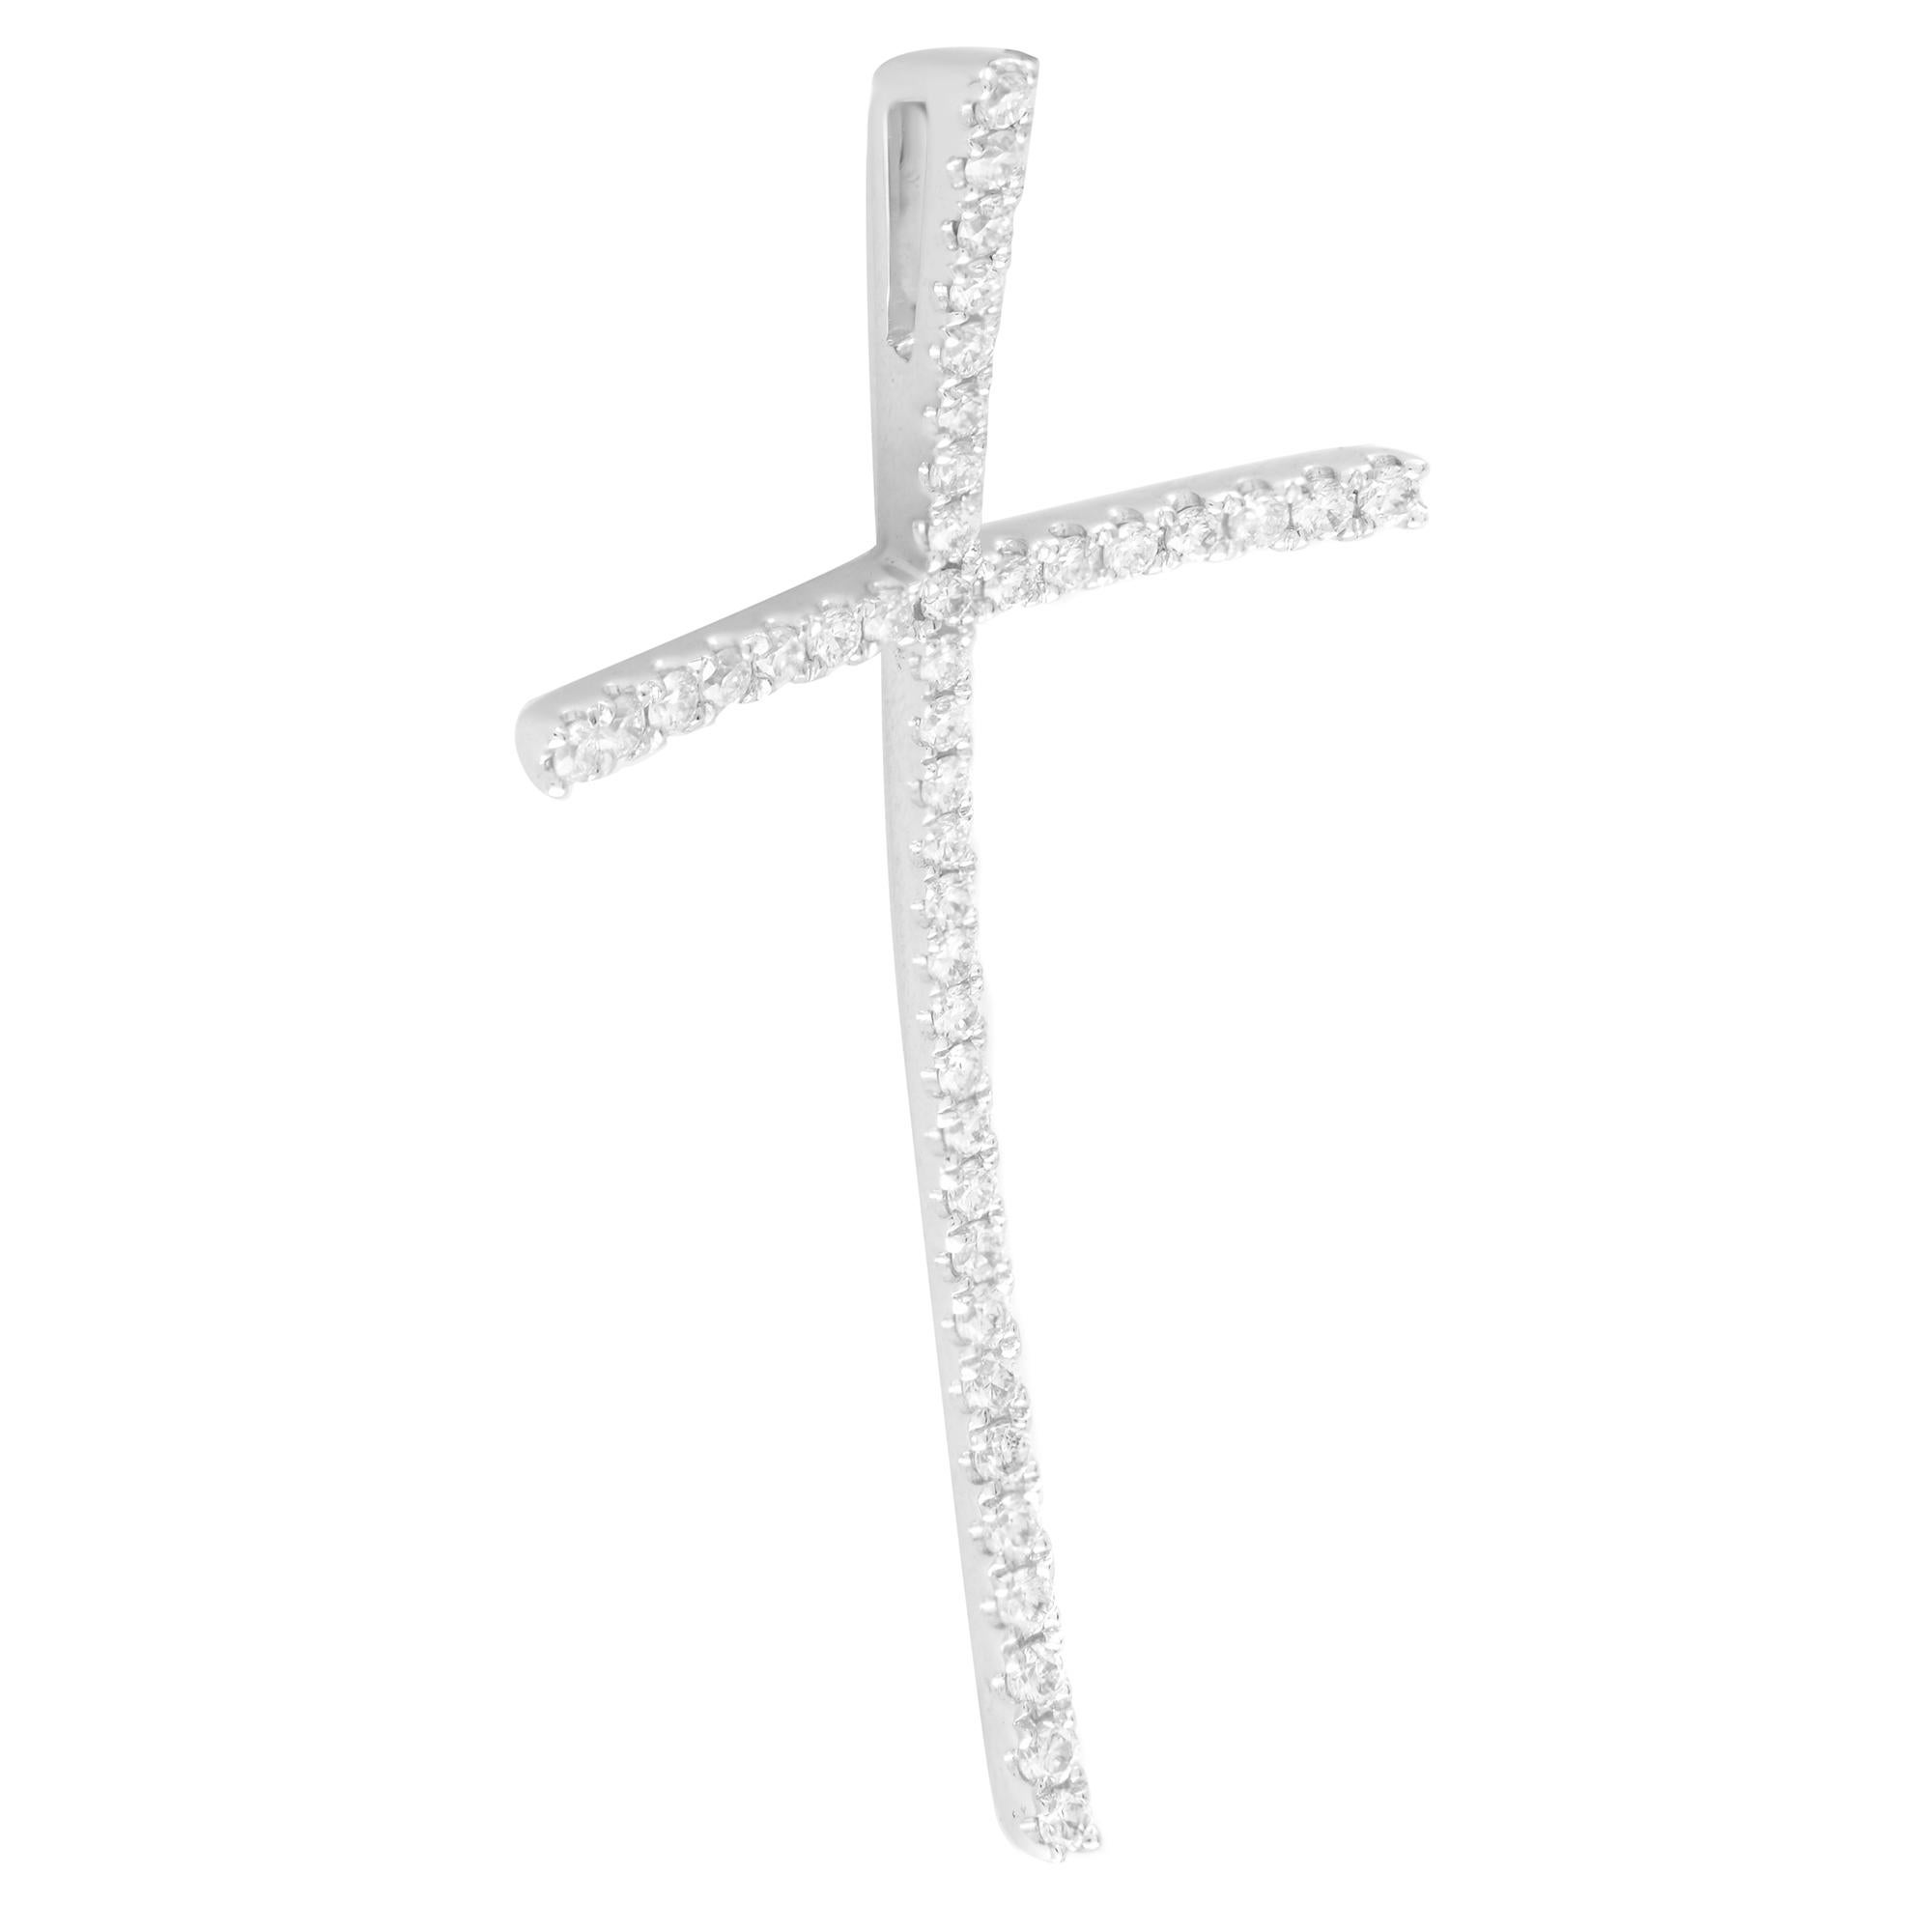 A unique style curved diamond cross pendant. Crafted in 18k white gold and pave set with tiny round cut diamonds. Total carat weight: 0.42. Diamond color I and SI-I clarity. Cross measurements: 38x20mm. Chain is no included. Comes with a presentable